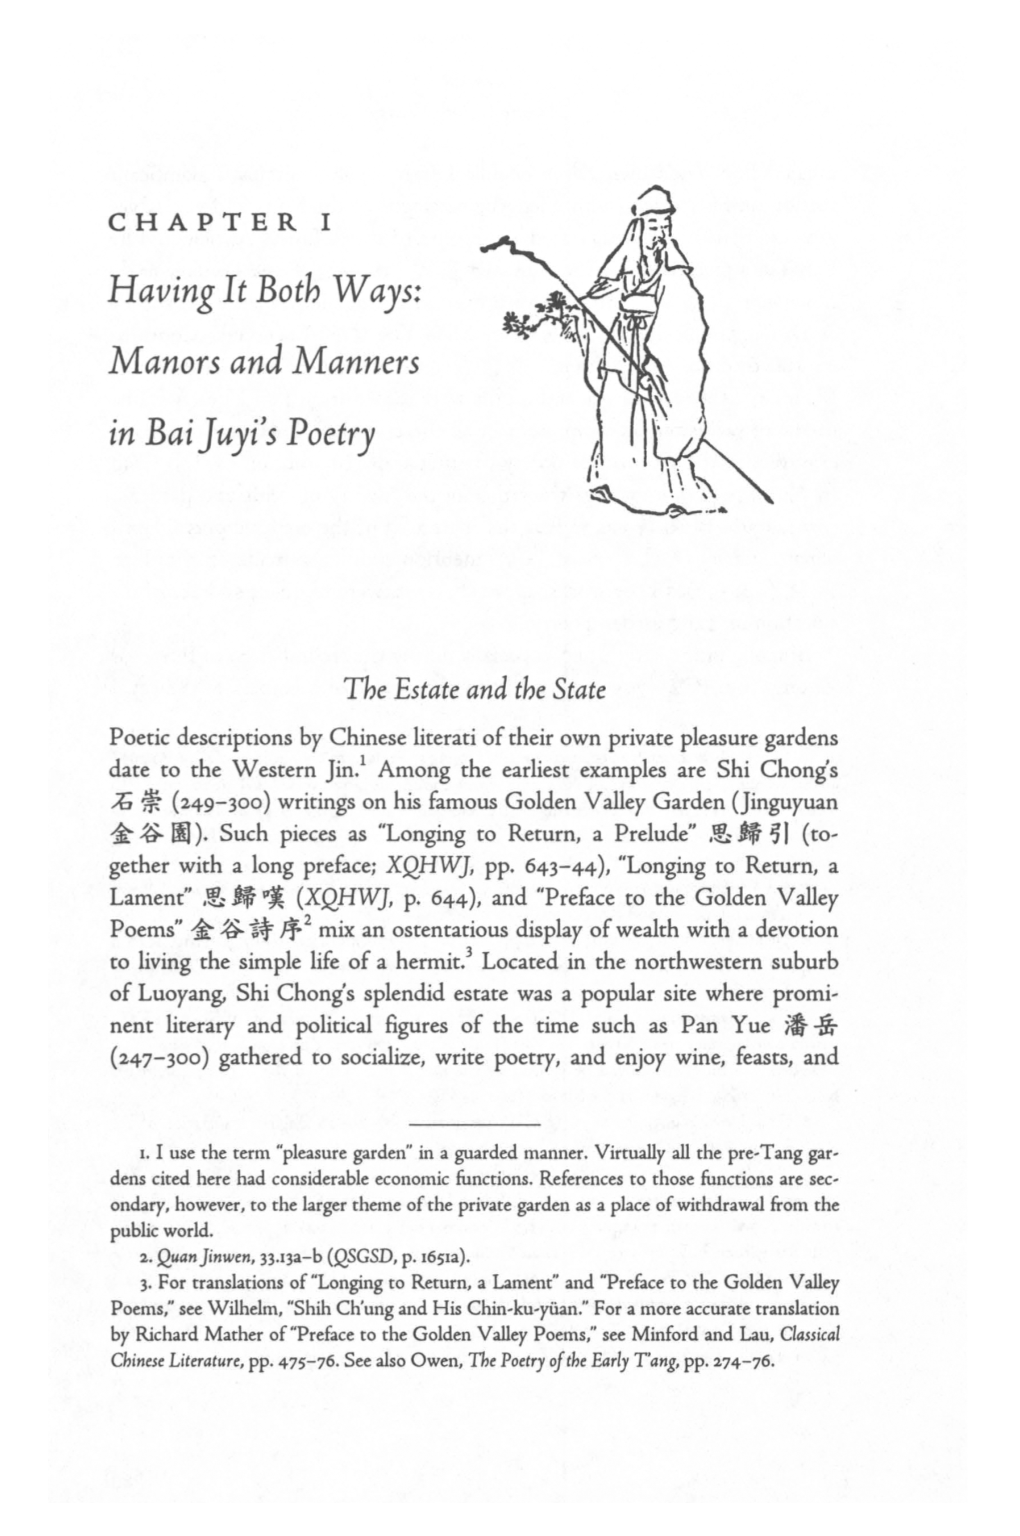 Manors and Manners in Bai ]Uyi's Poetry